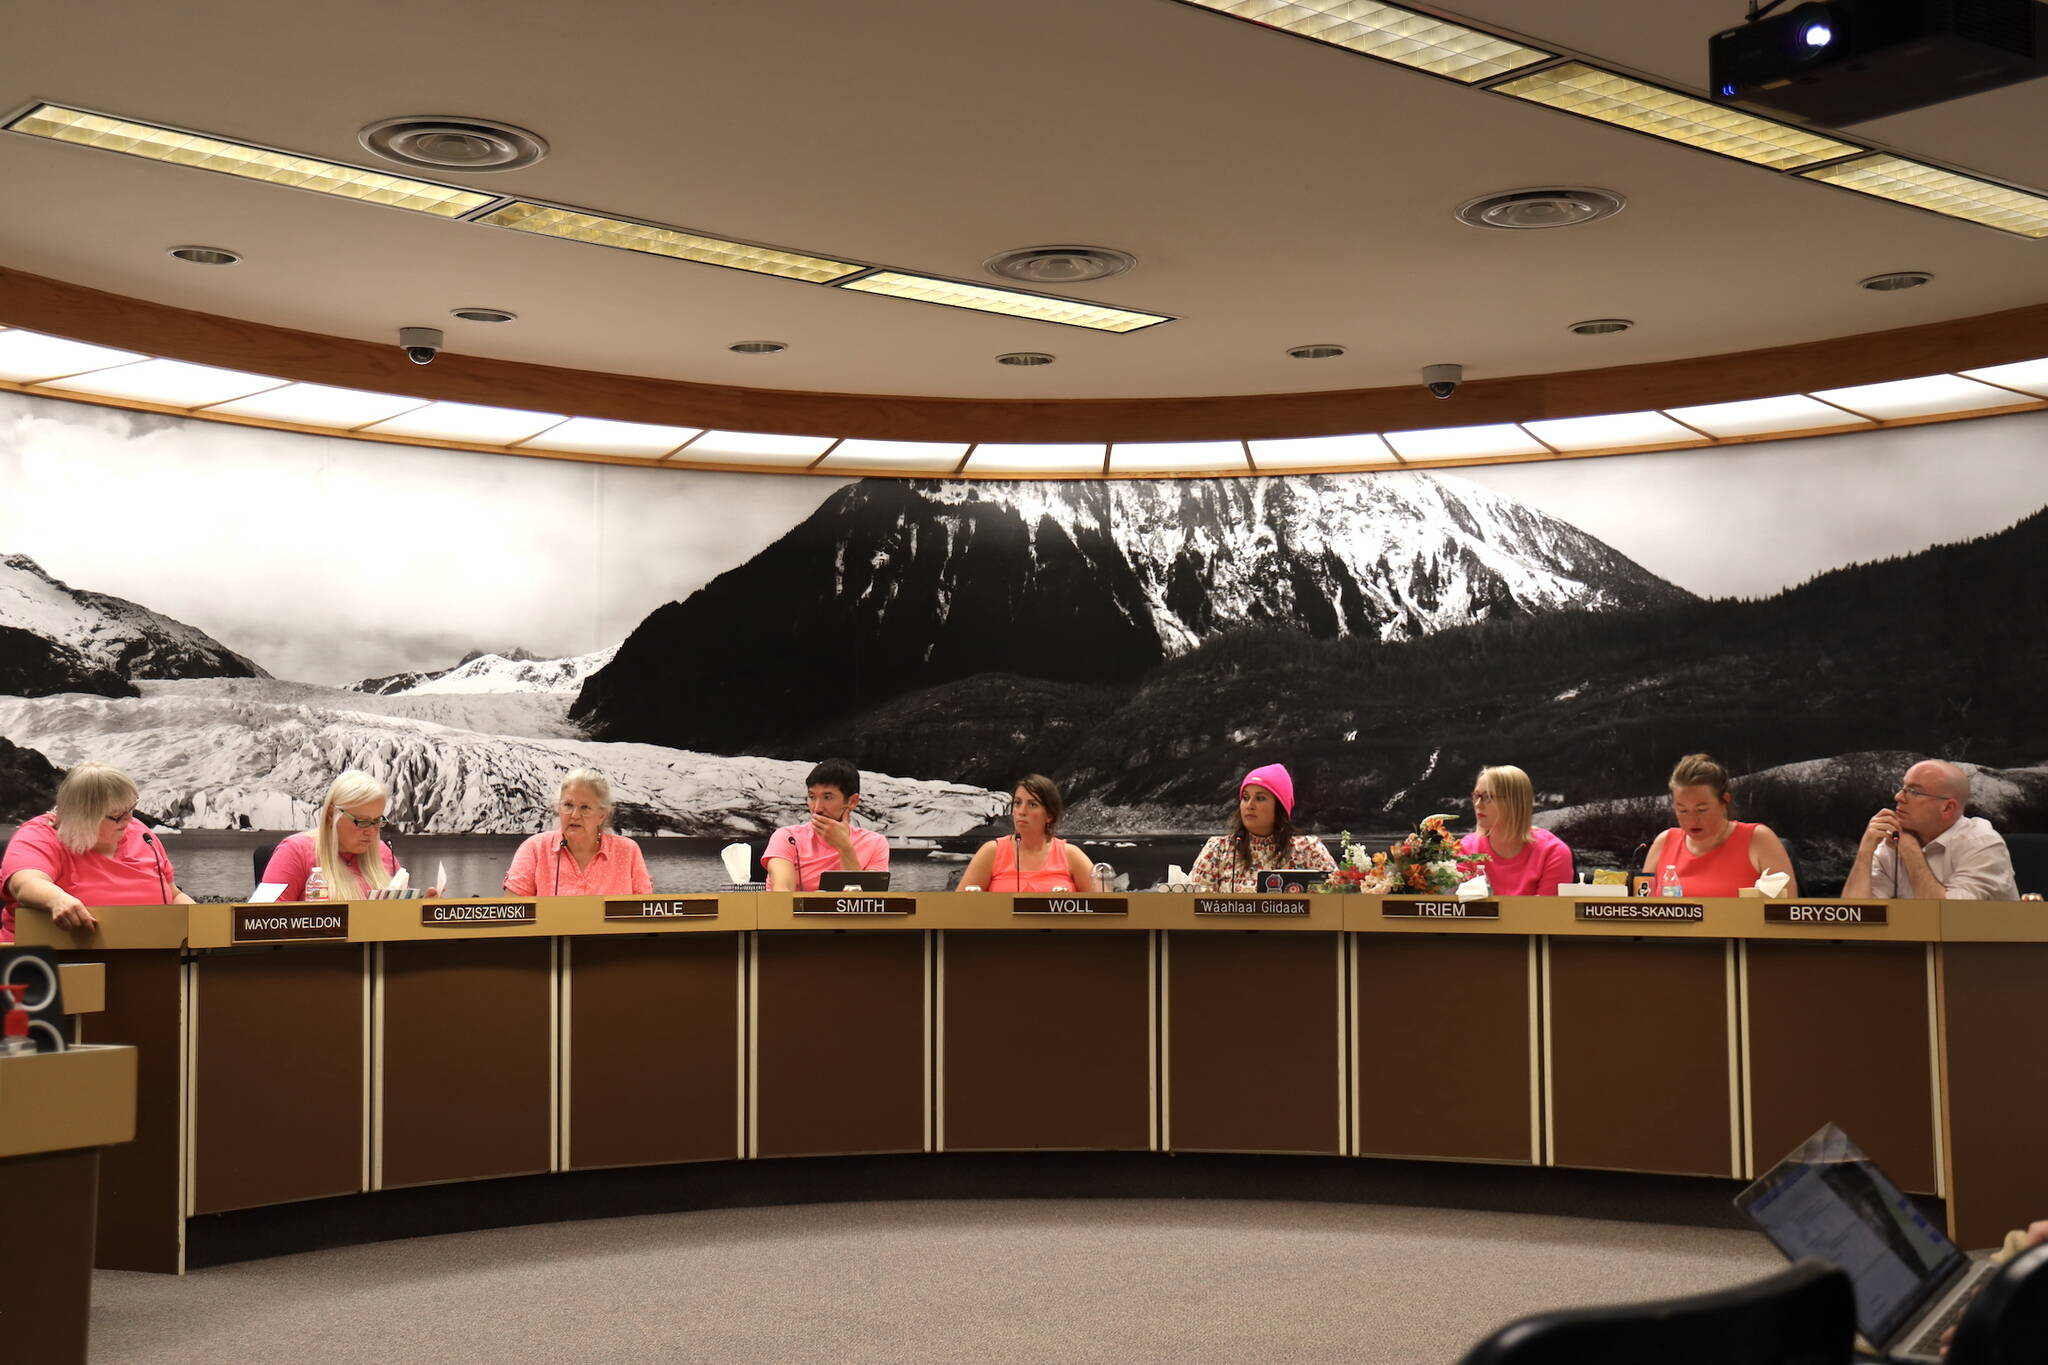 The City and Borough of Juneau Assembly was in full attendance sporting the color pink while conducting a meeting in early July in honor of departing member Carole Triem. (Clarise Larson / Juneau Empire File)